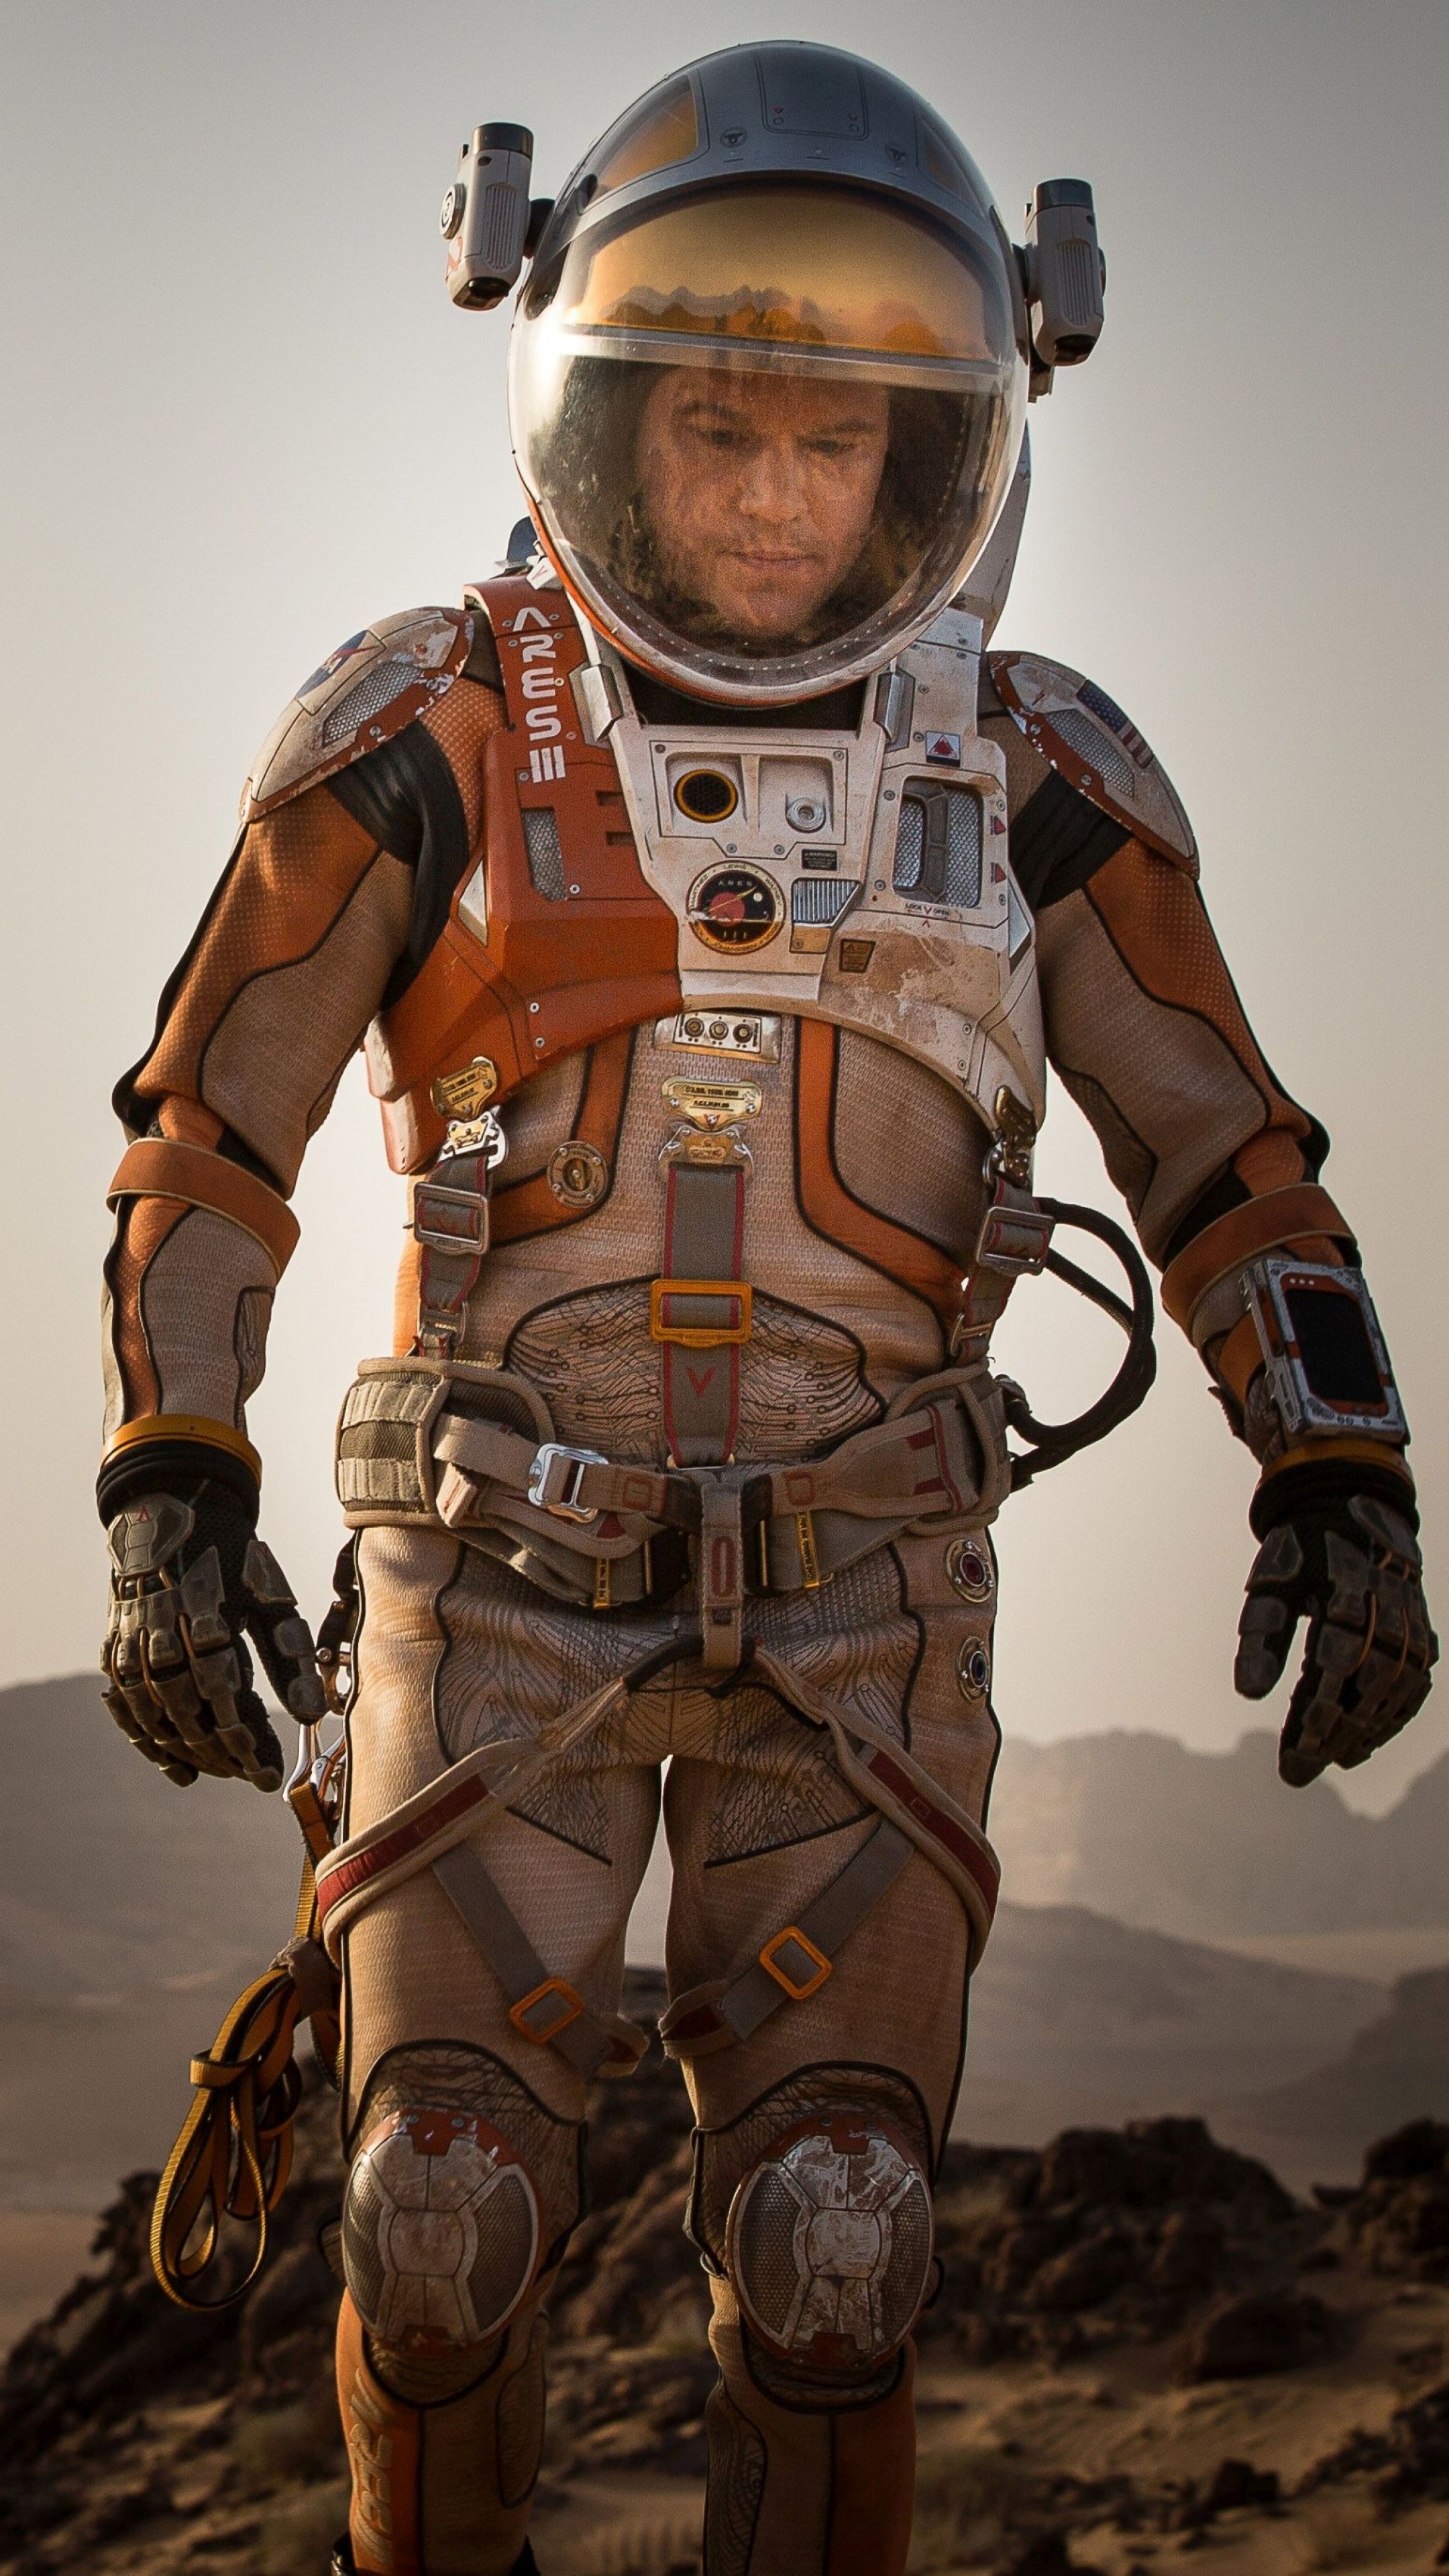 The Martian Movie, Science Fiction, Best Movies, 2015 Film, 2160x3840 4K Phone